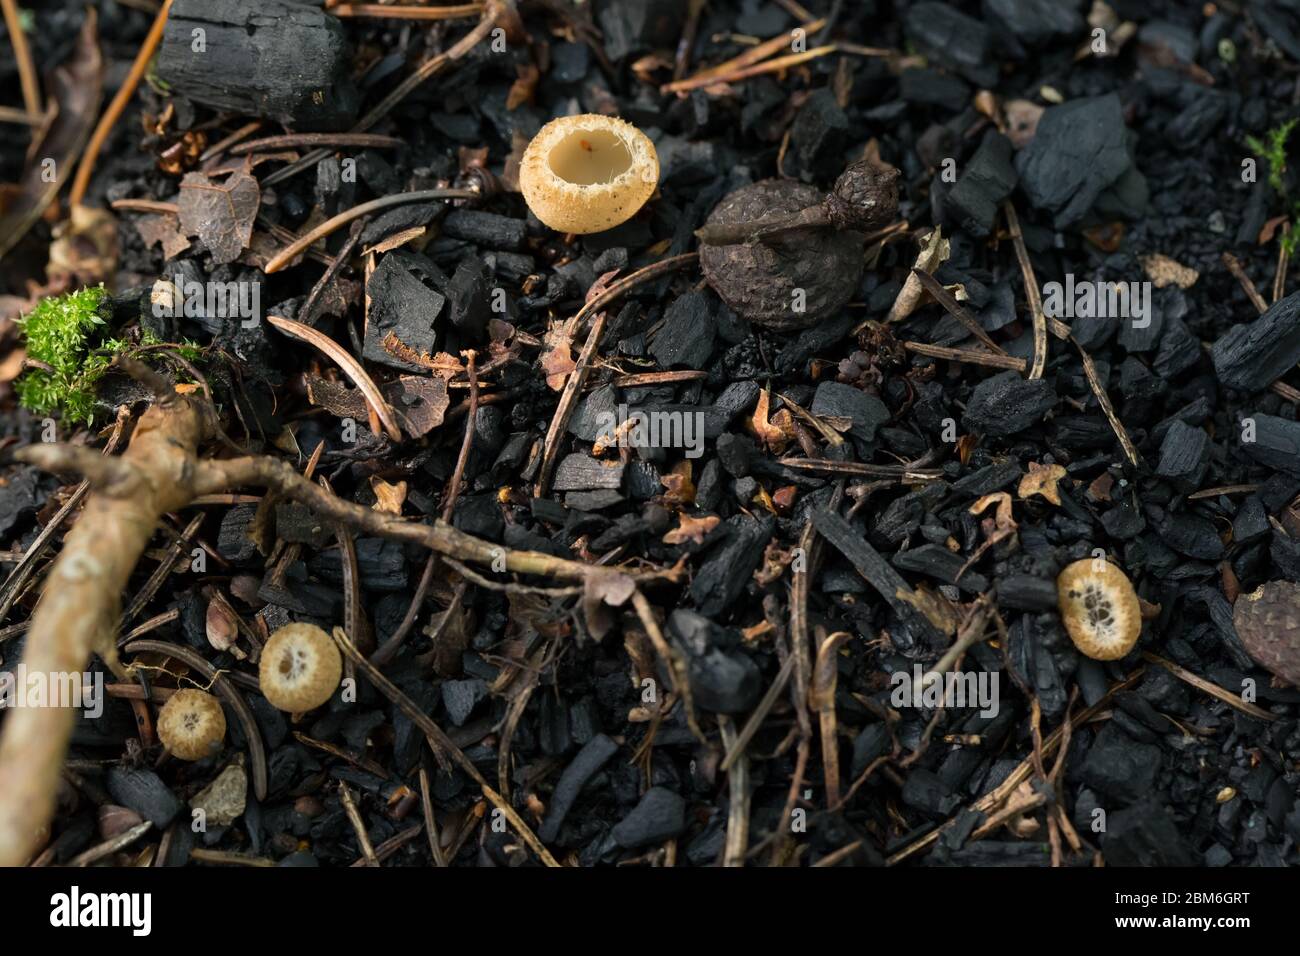 Greater toothed cup fungus Stock Photo